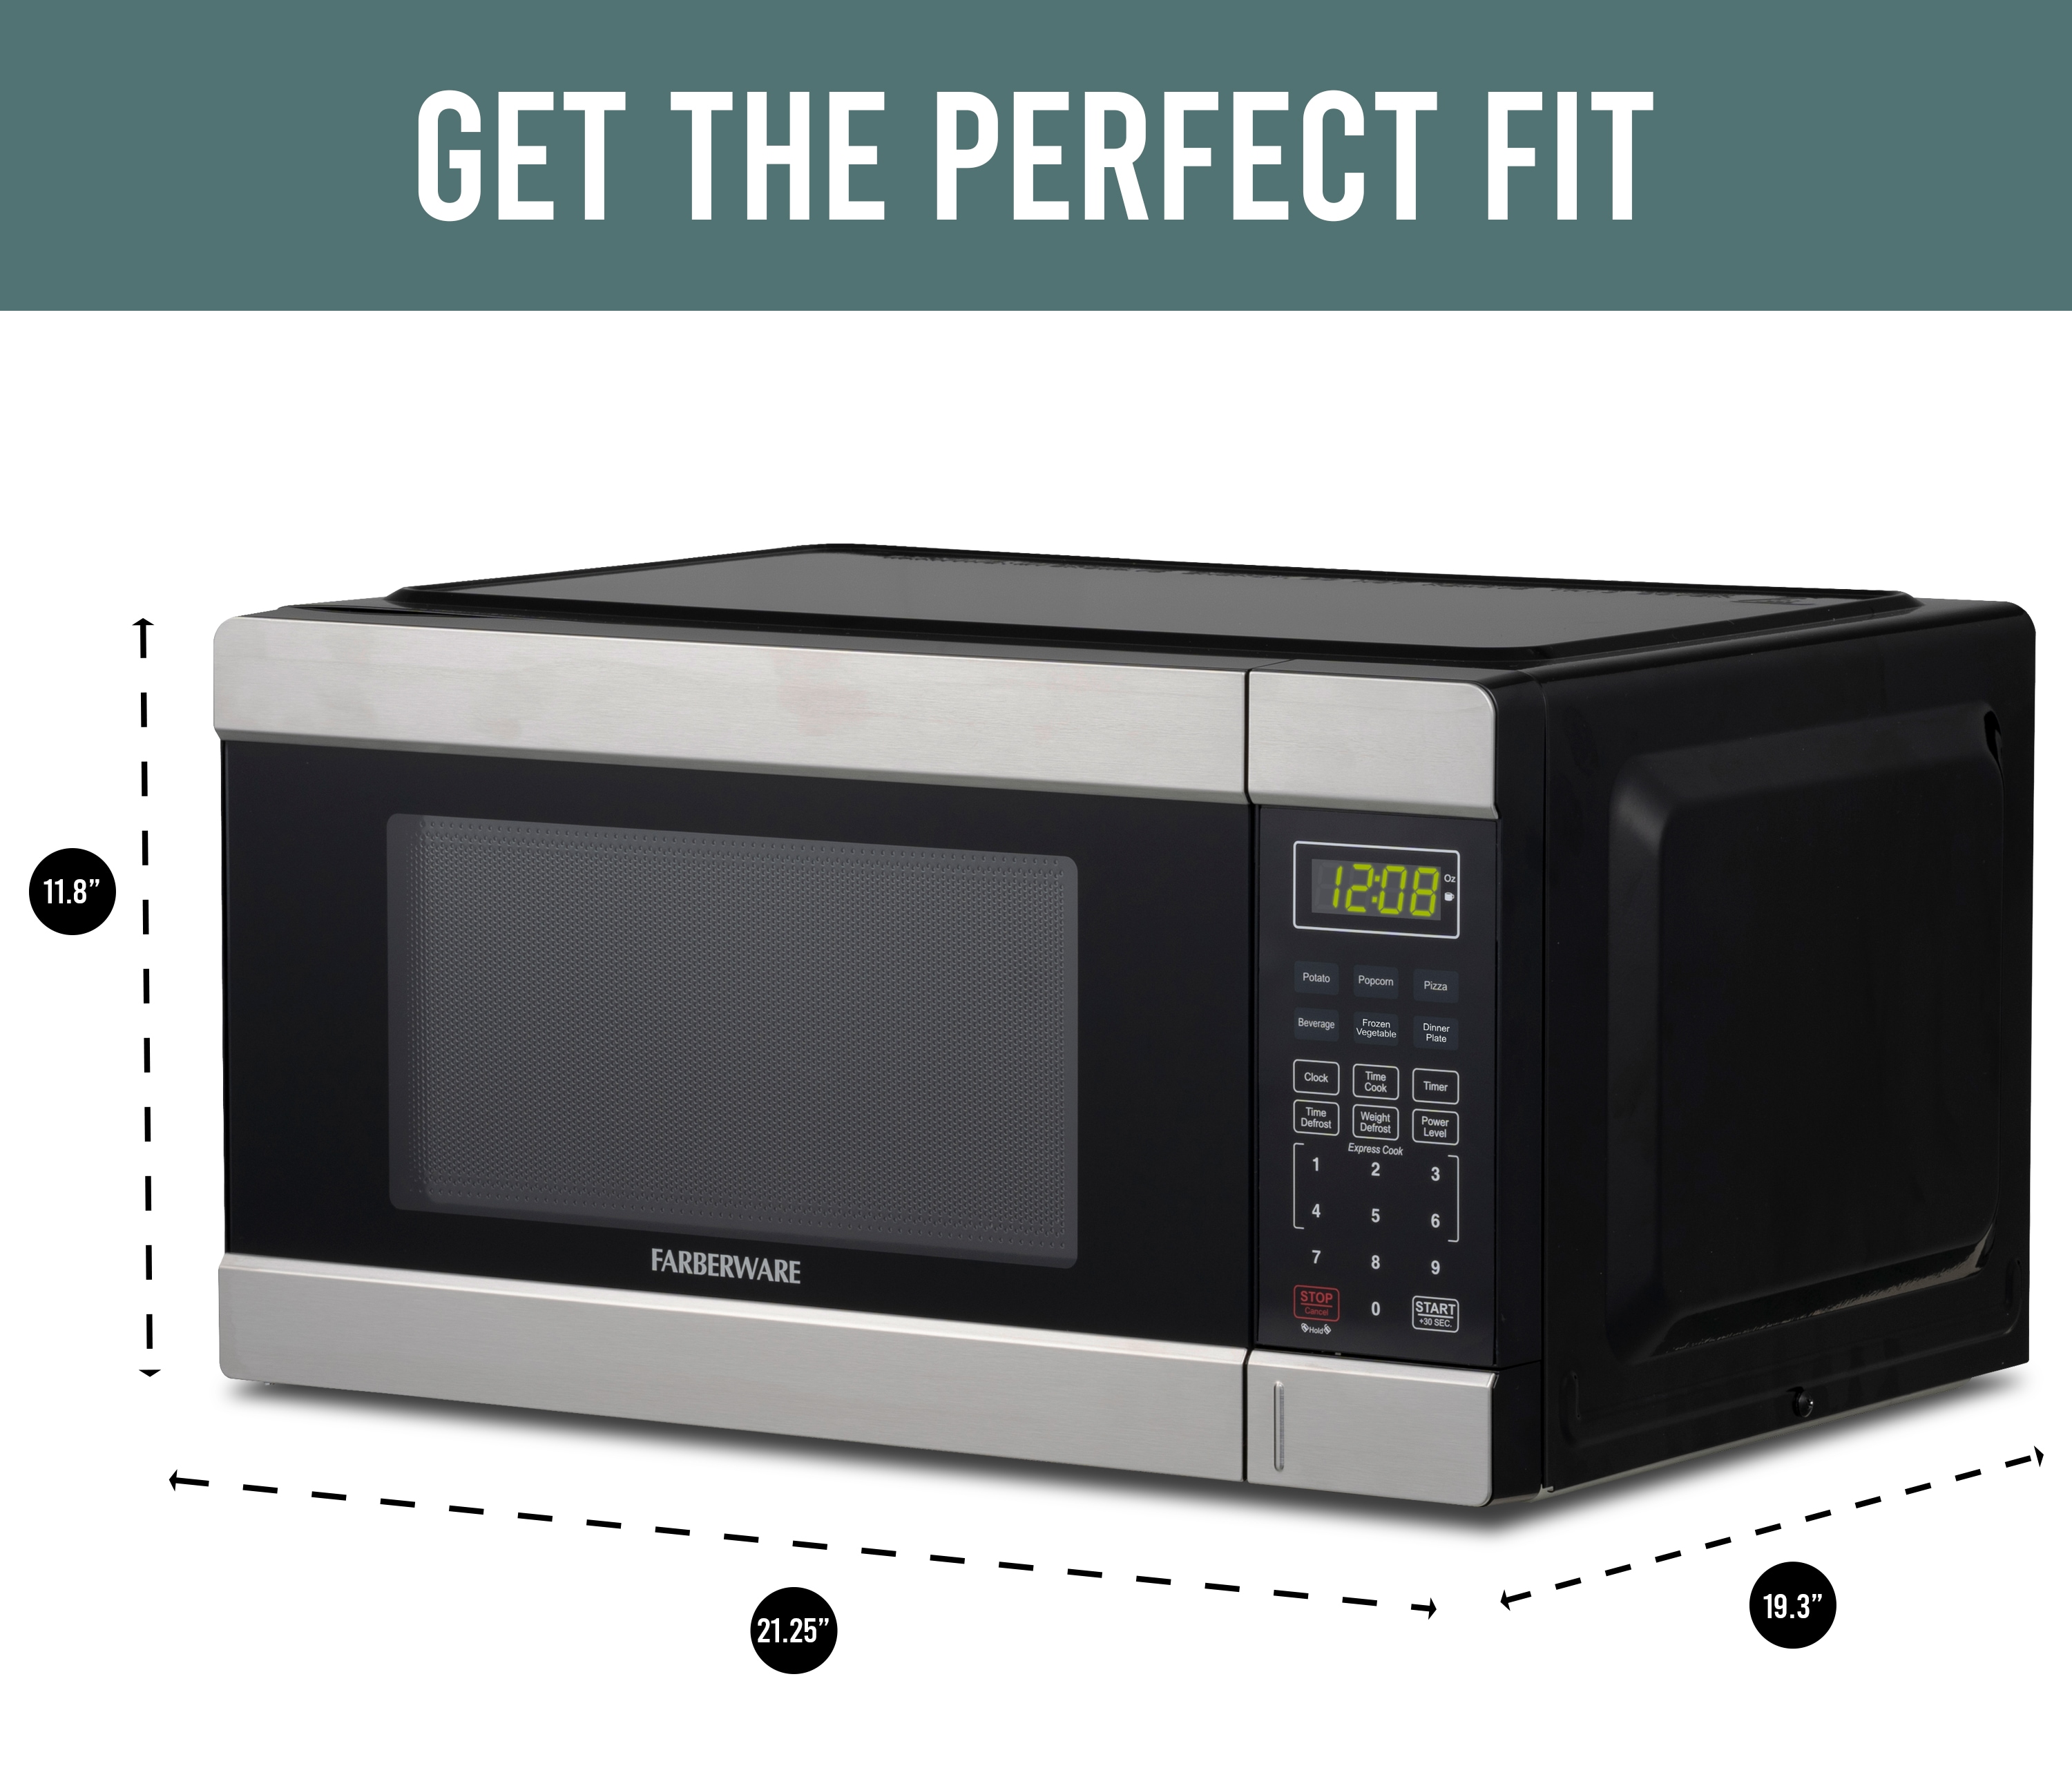 Farberware Professional FMO12AHTBKE Microwave Oven Review 